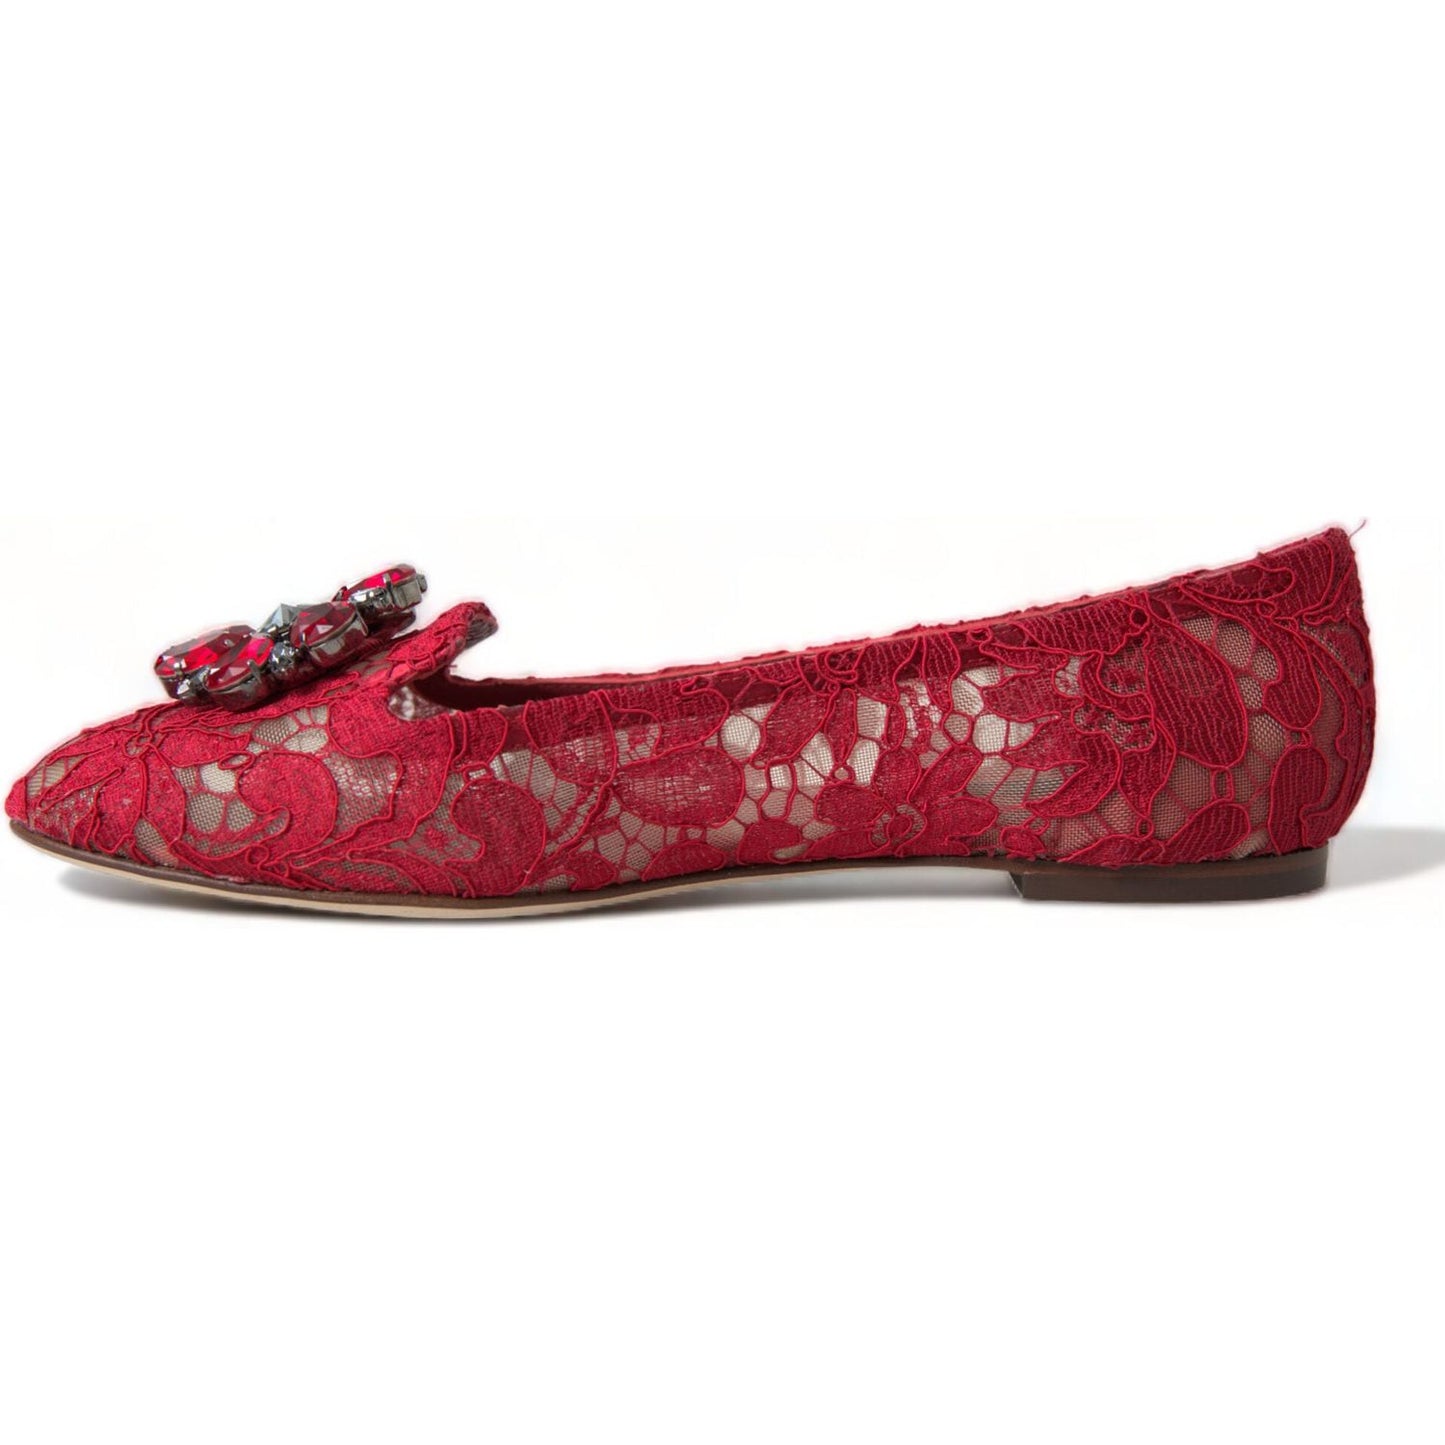 Dolce & Gabbana Elegant Floral Lace Vally Flats red-vally-taormina-lace-crystals-flats-shoes 465A9055-bg-scaled-84f997ad-a22.jpg